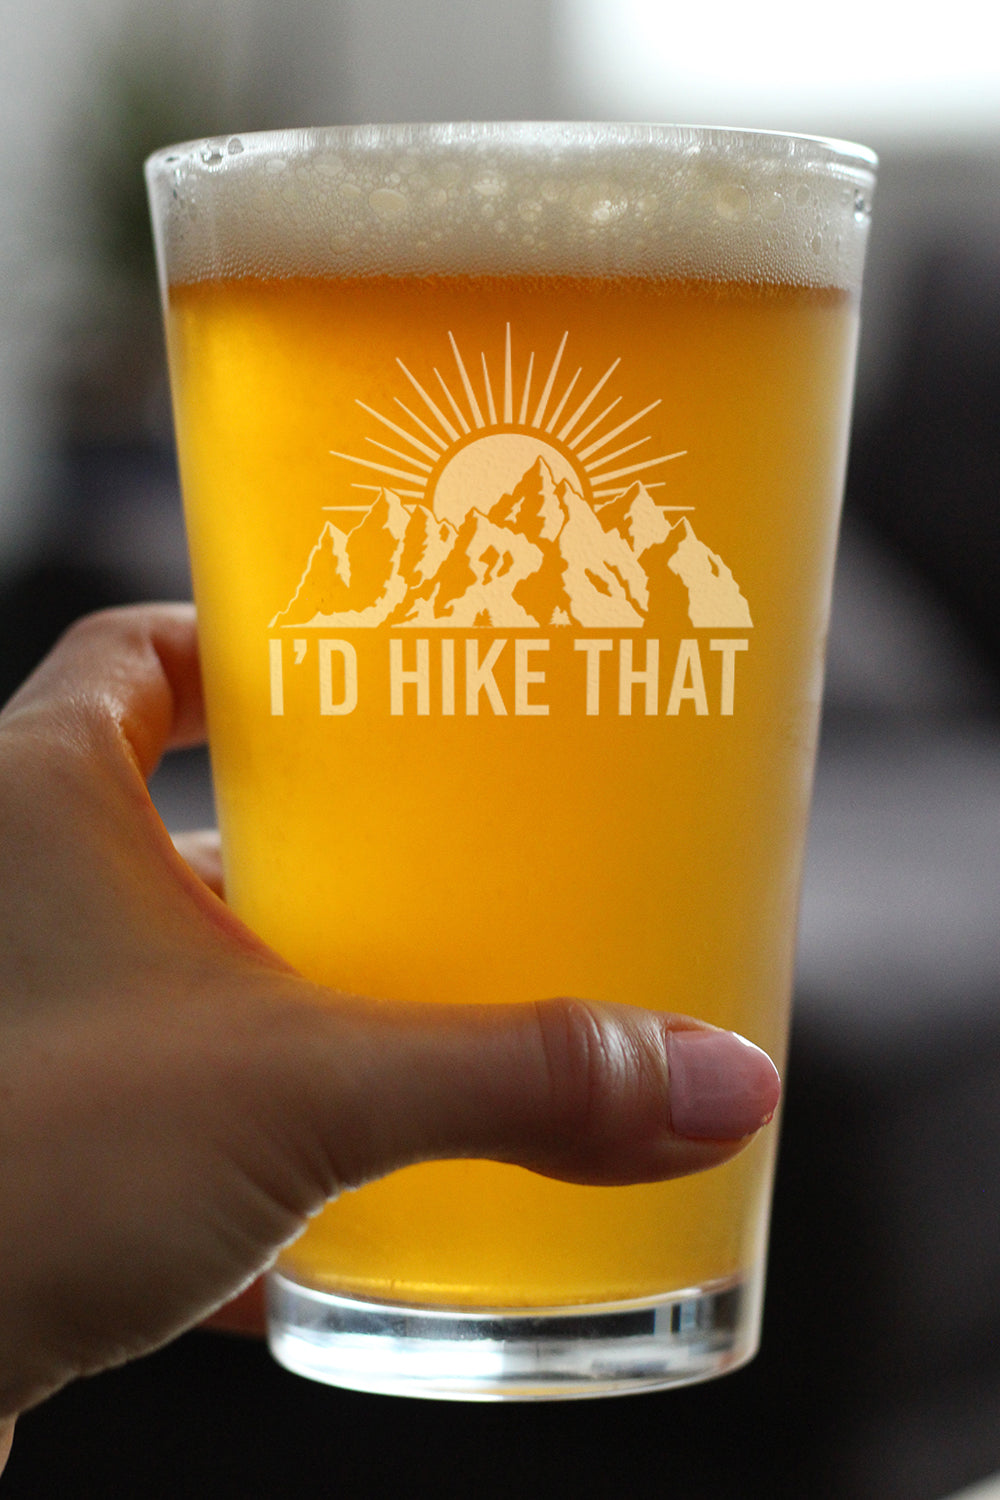 I&#39;d Hike That - Pint Glass for Beer - Cool Hiking Themed Decor and Gifts for Mountain Lovers - 16 oz Glasses